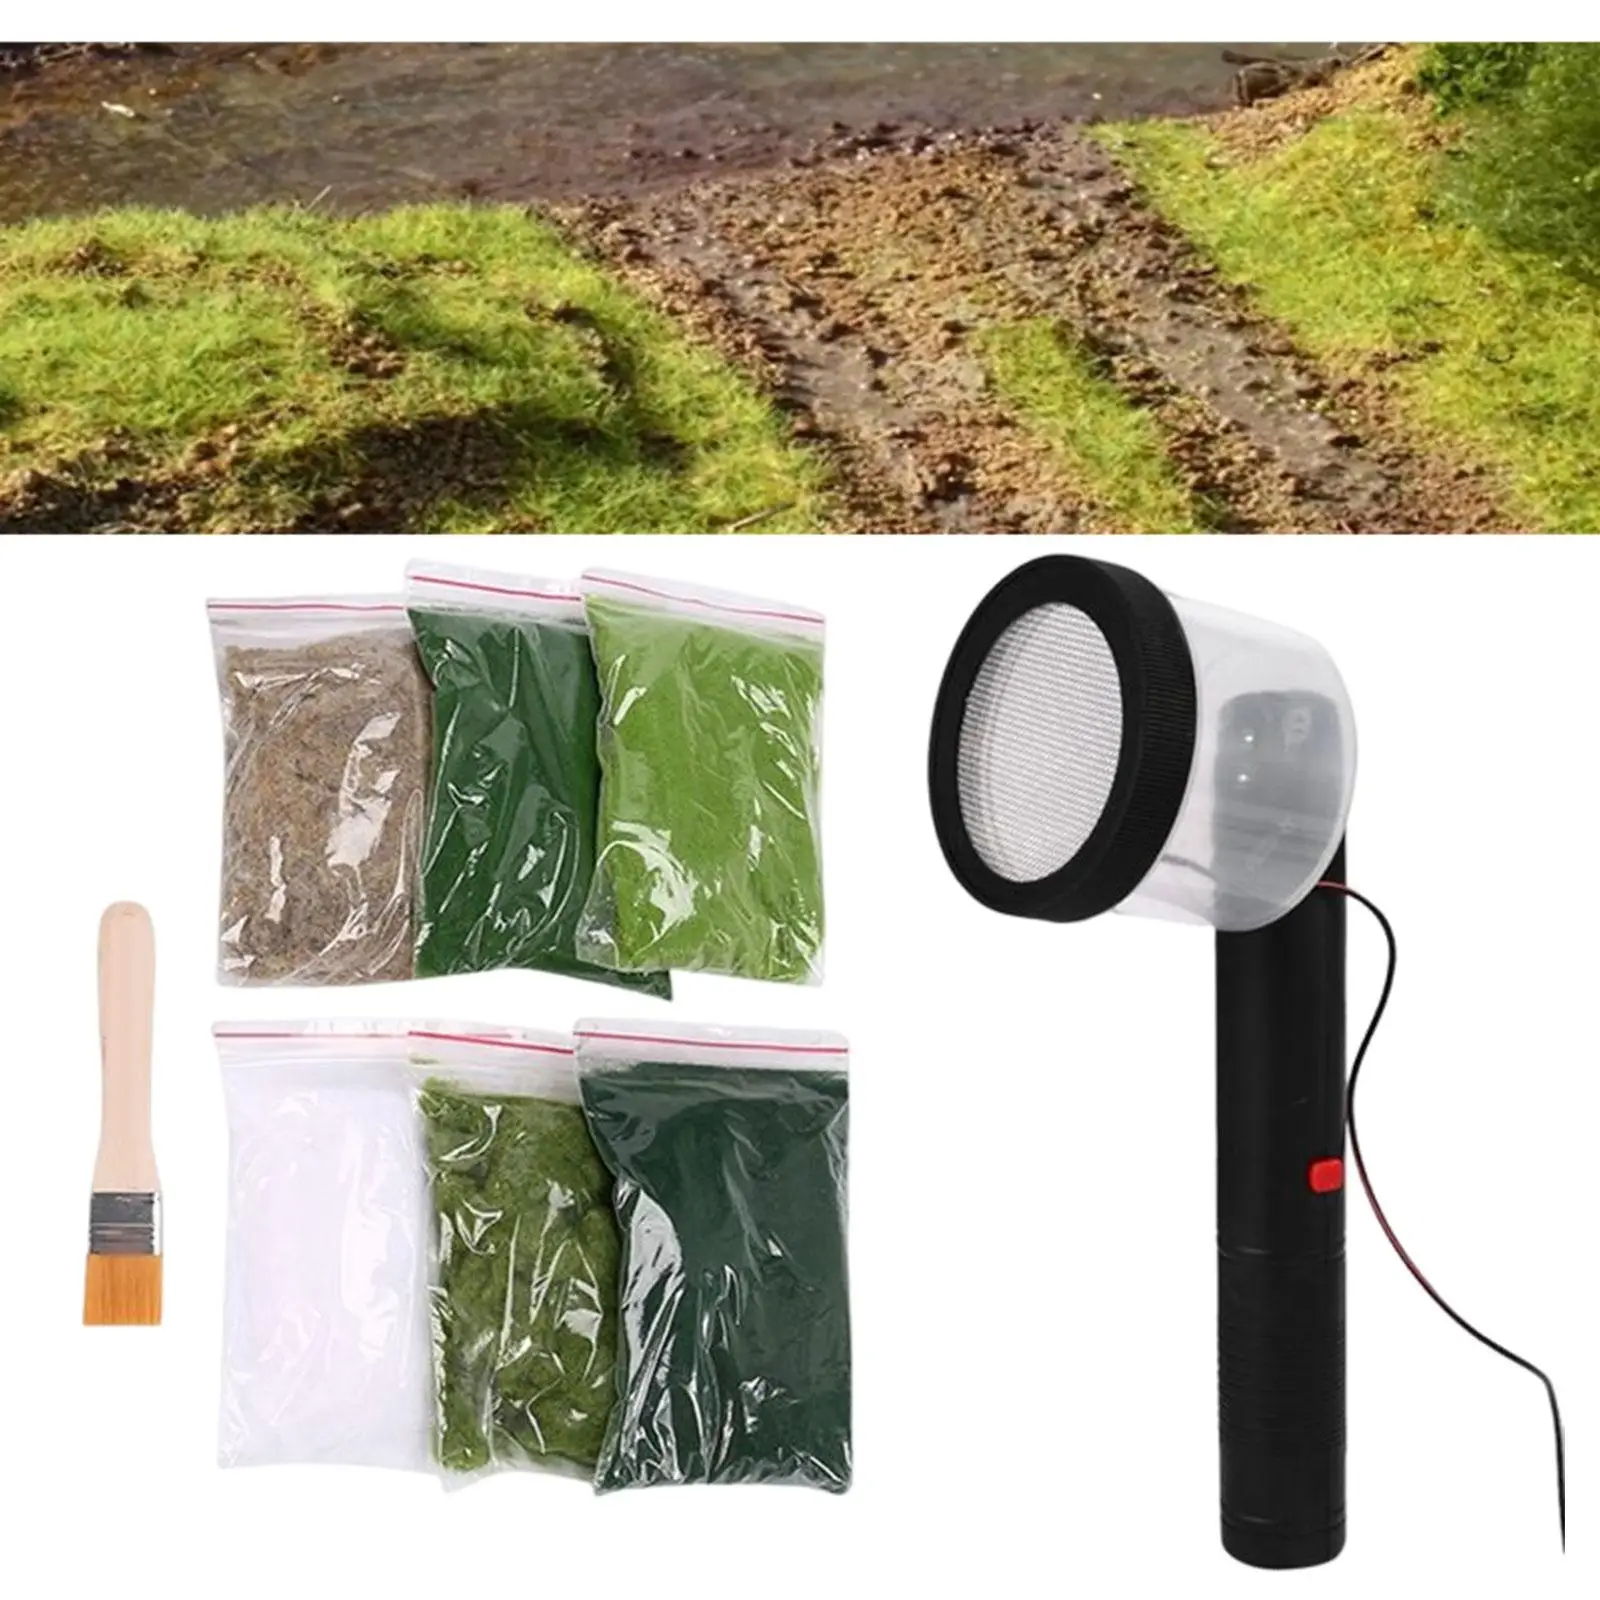 Static Grass Applicator Project Accessories DIY Miniature Scene Model Railway with 6 Bags Static Grass Sandtable Static Flocking